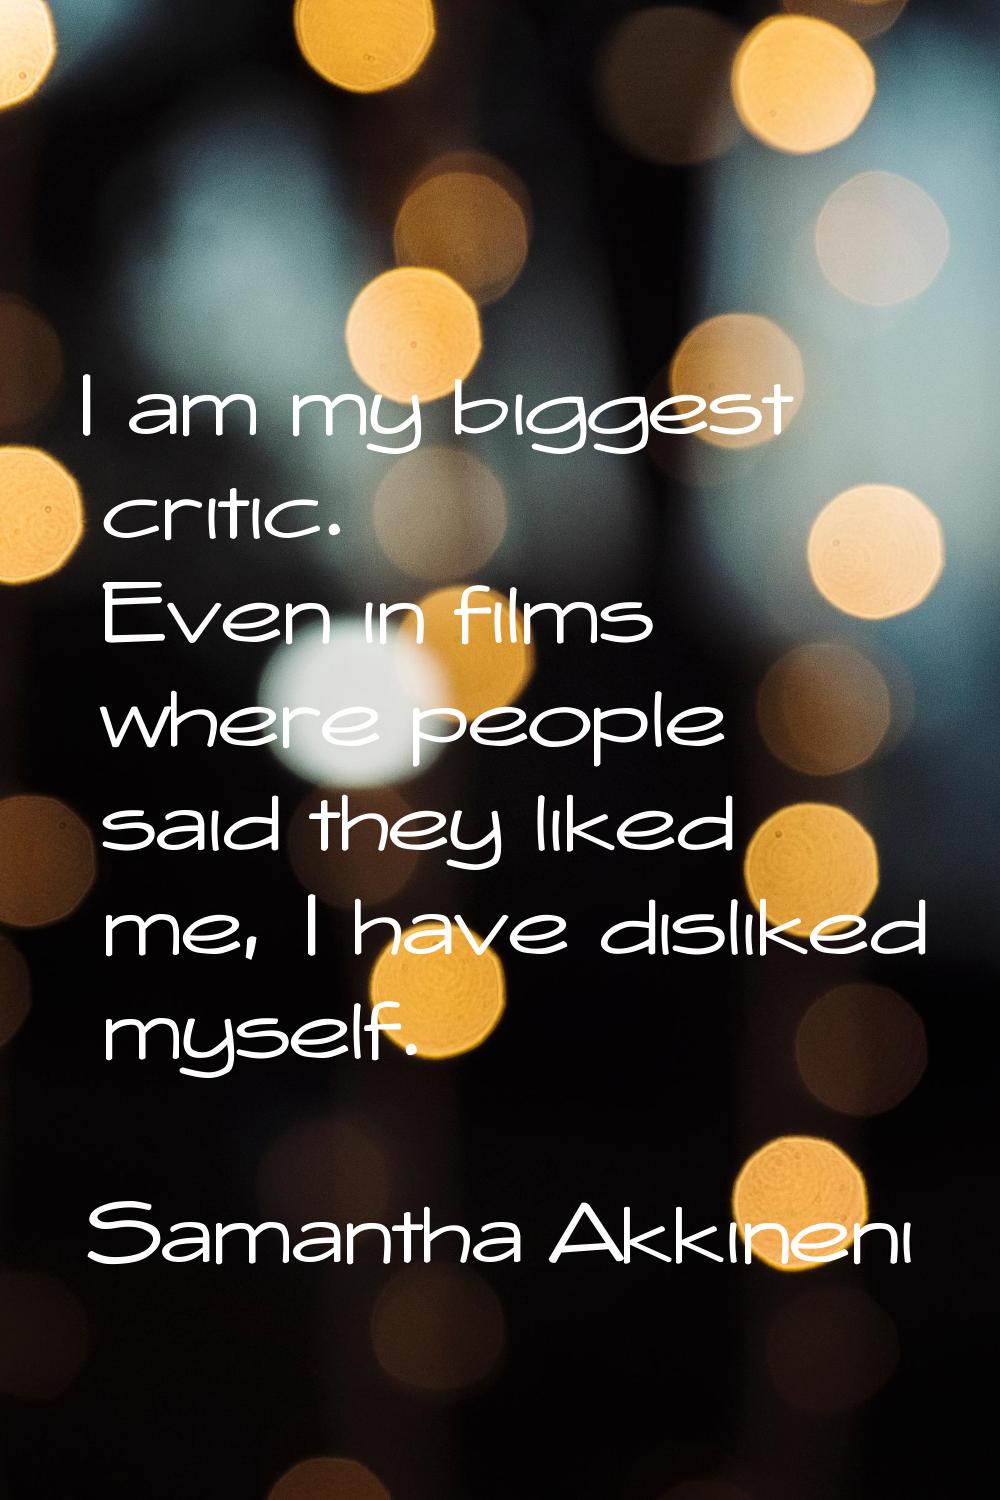 I am my biggest critic. Even in films where people said they liked me, I have disliked myself.